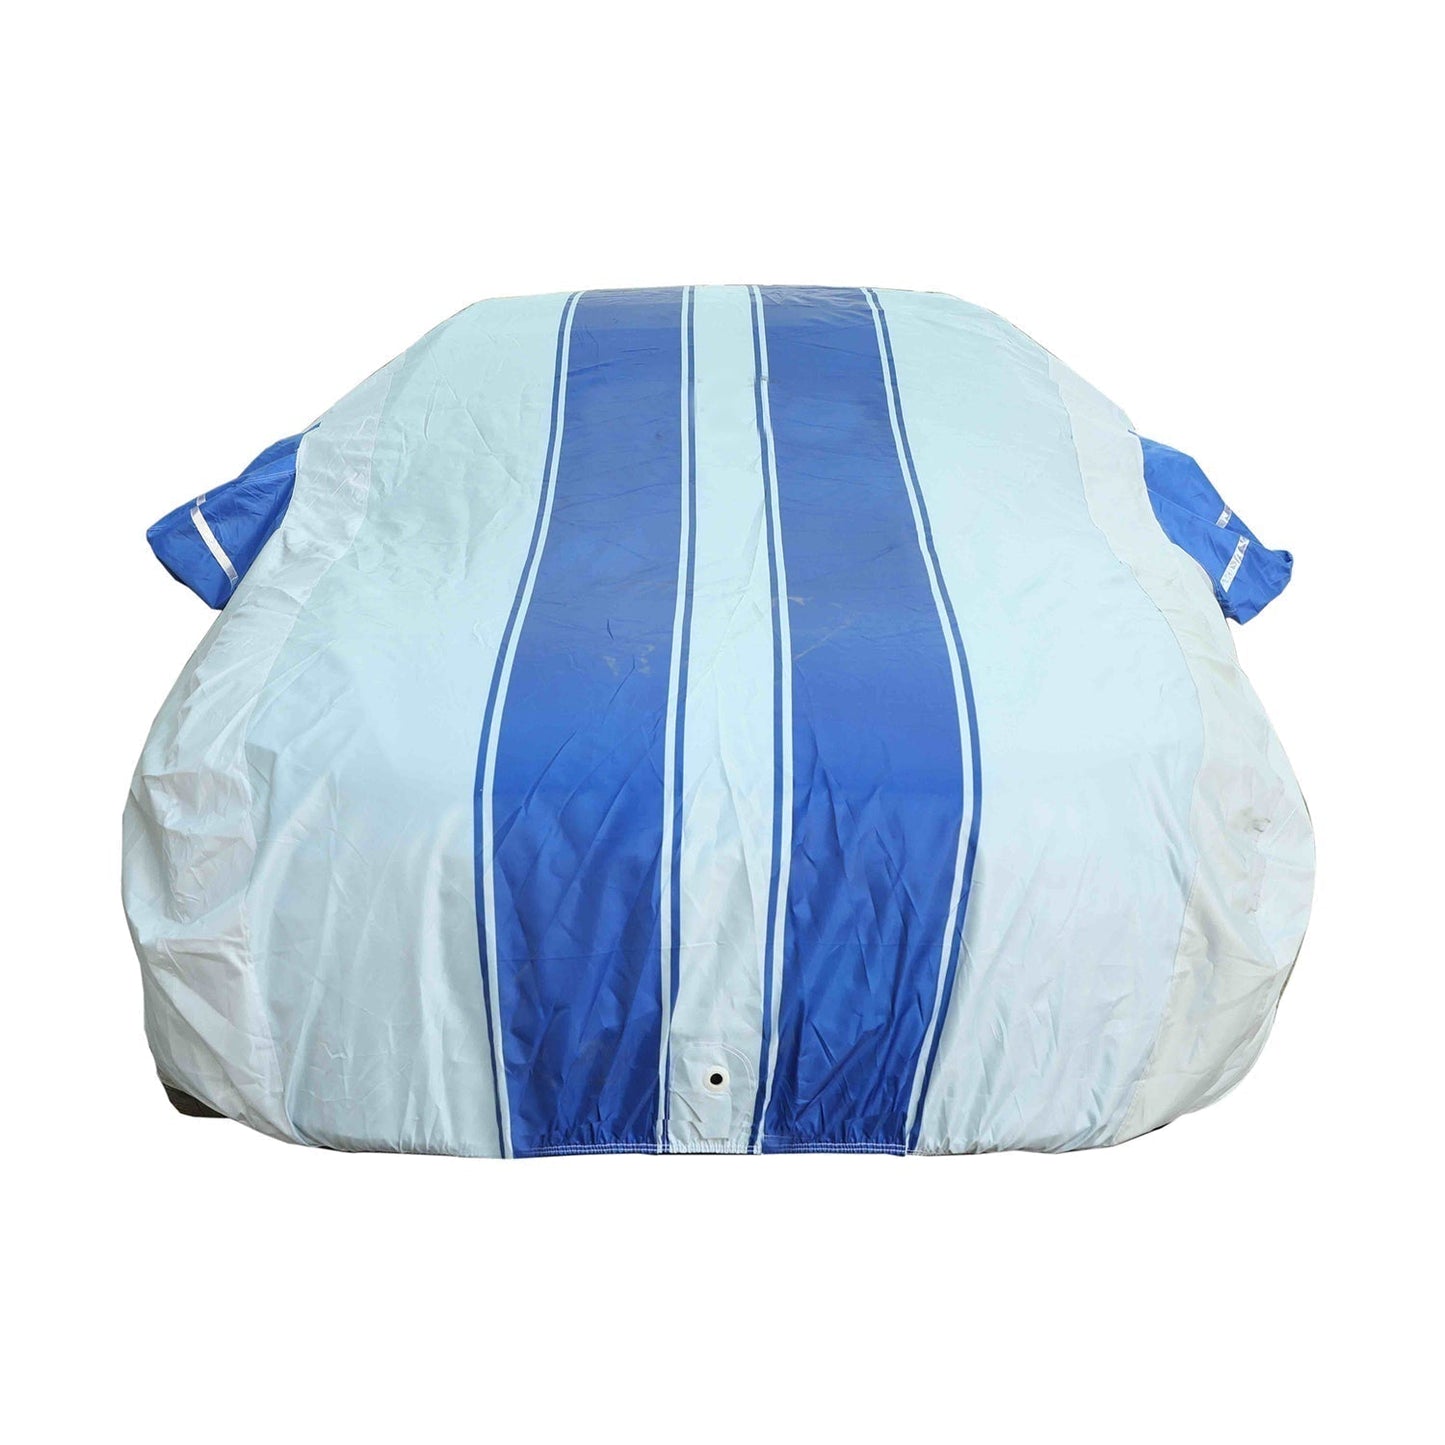 Oshotto 100% Blue dustproof and Water Resistant Car Body Cover with Mirror Pockets For Mahindra Scorpio